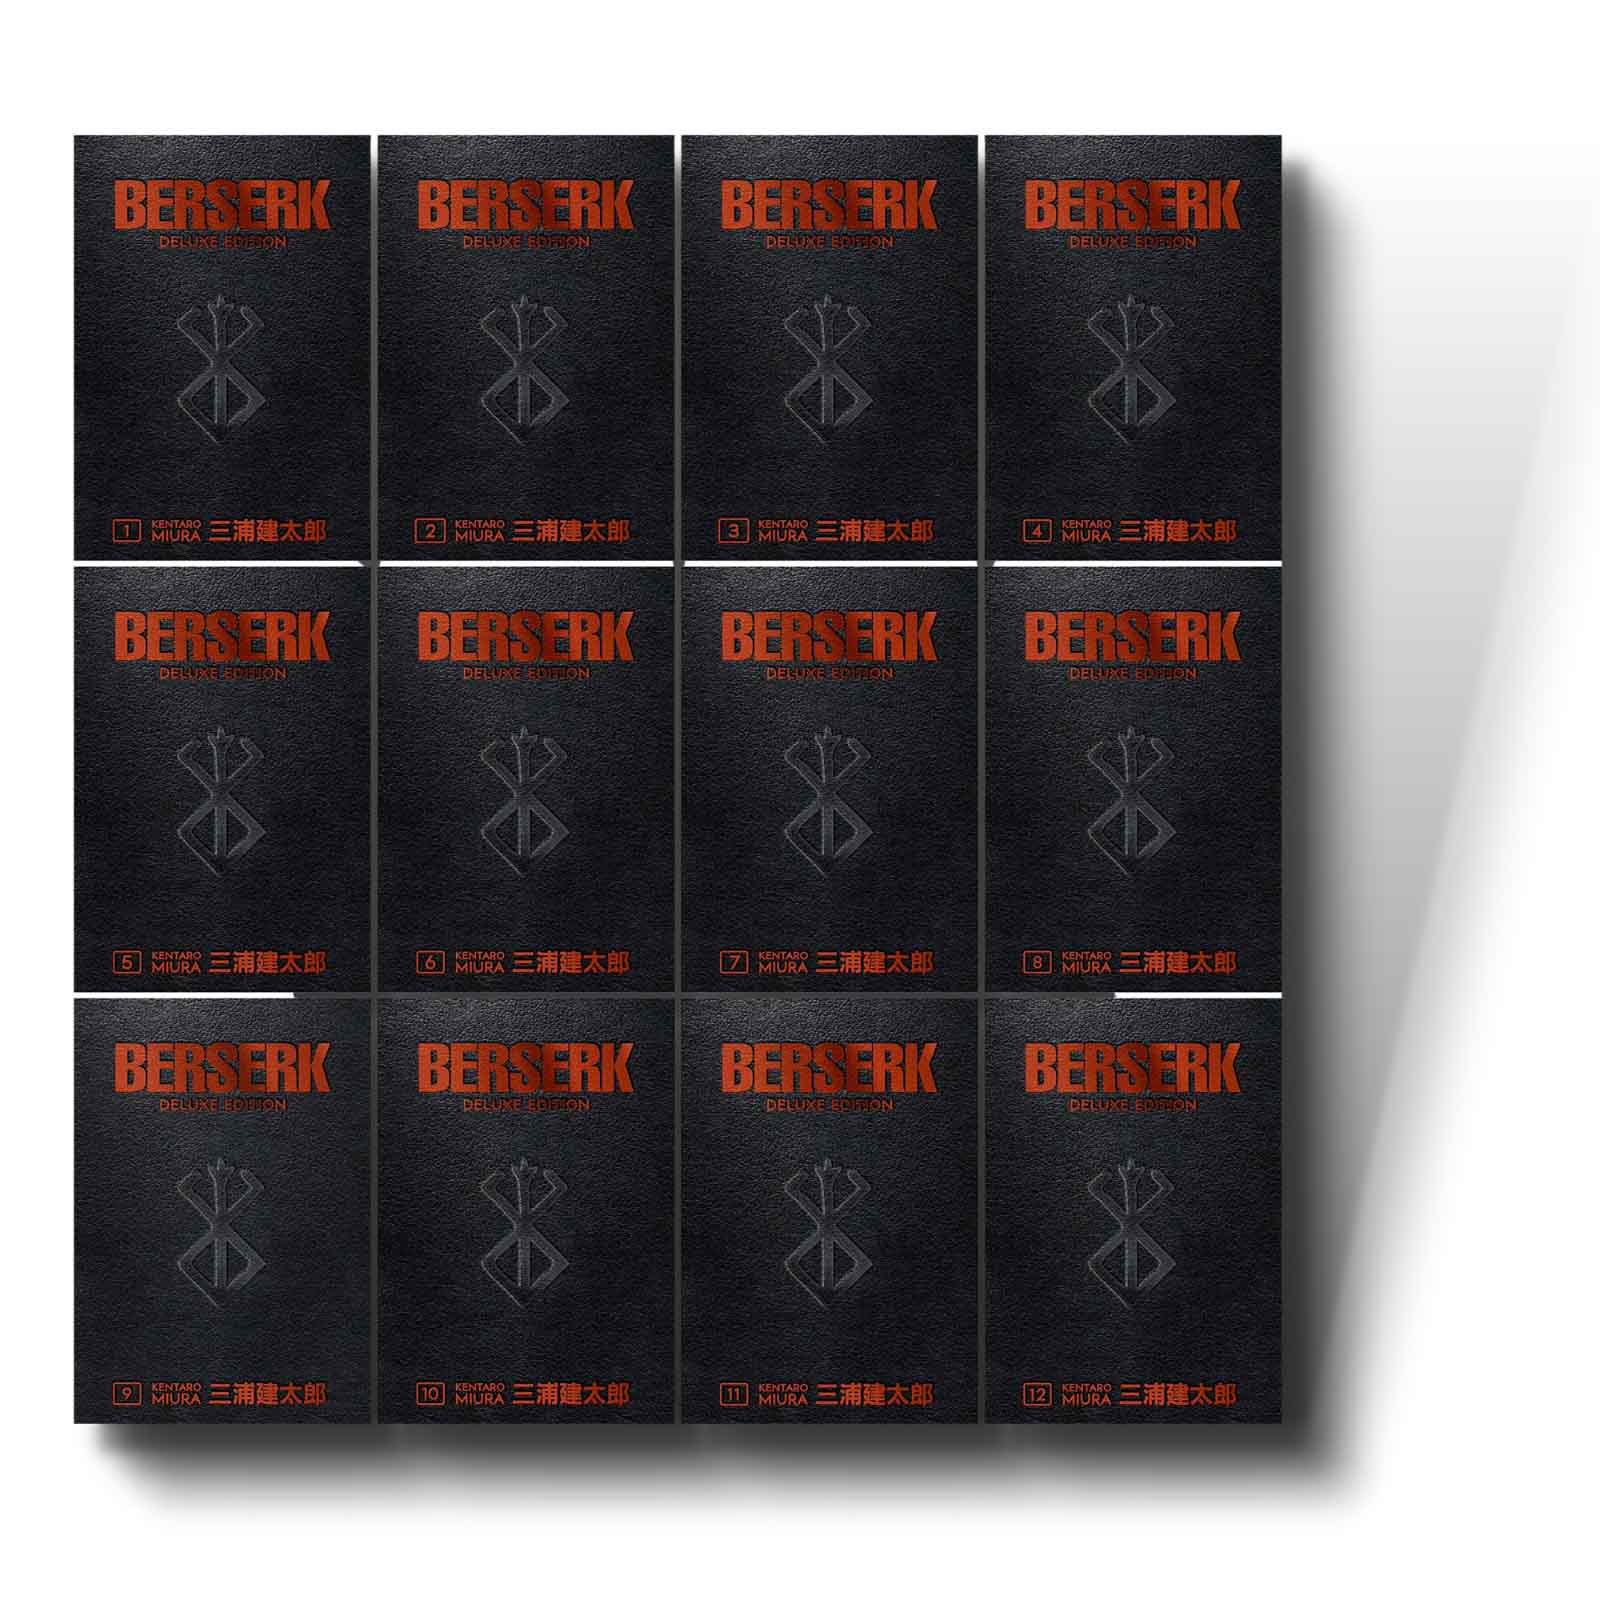 Berserk Deluxe Edition: The Complete Hardcover Collection, Books 1